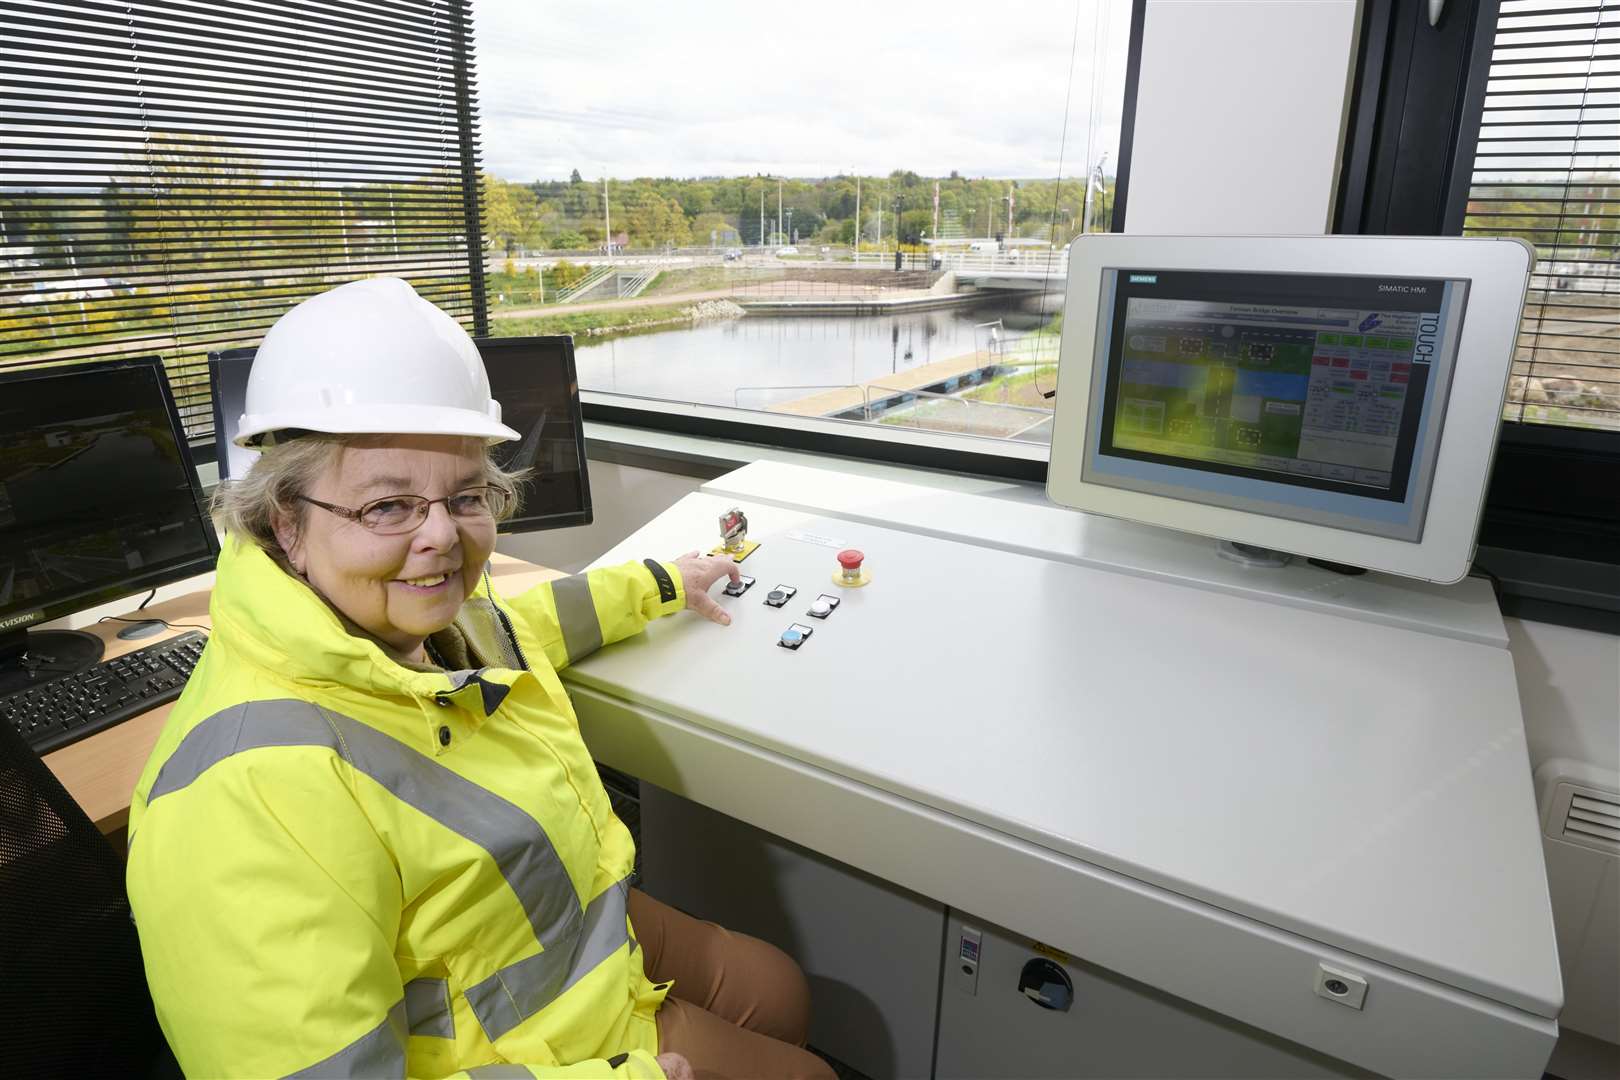 Cllr Trish Robertson in the control room for the swing bridges. Photo by Ewen Wetherspoon, photographer EW Photo.